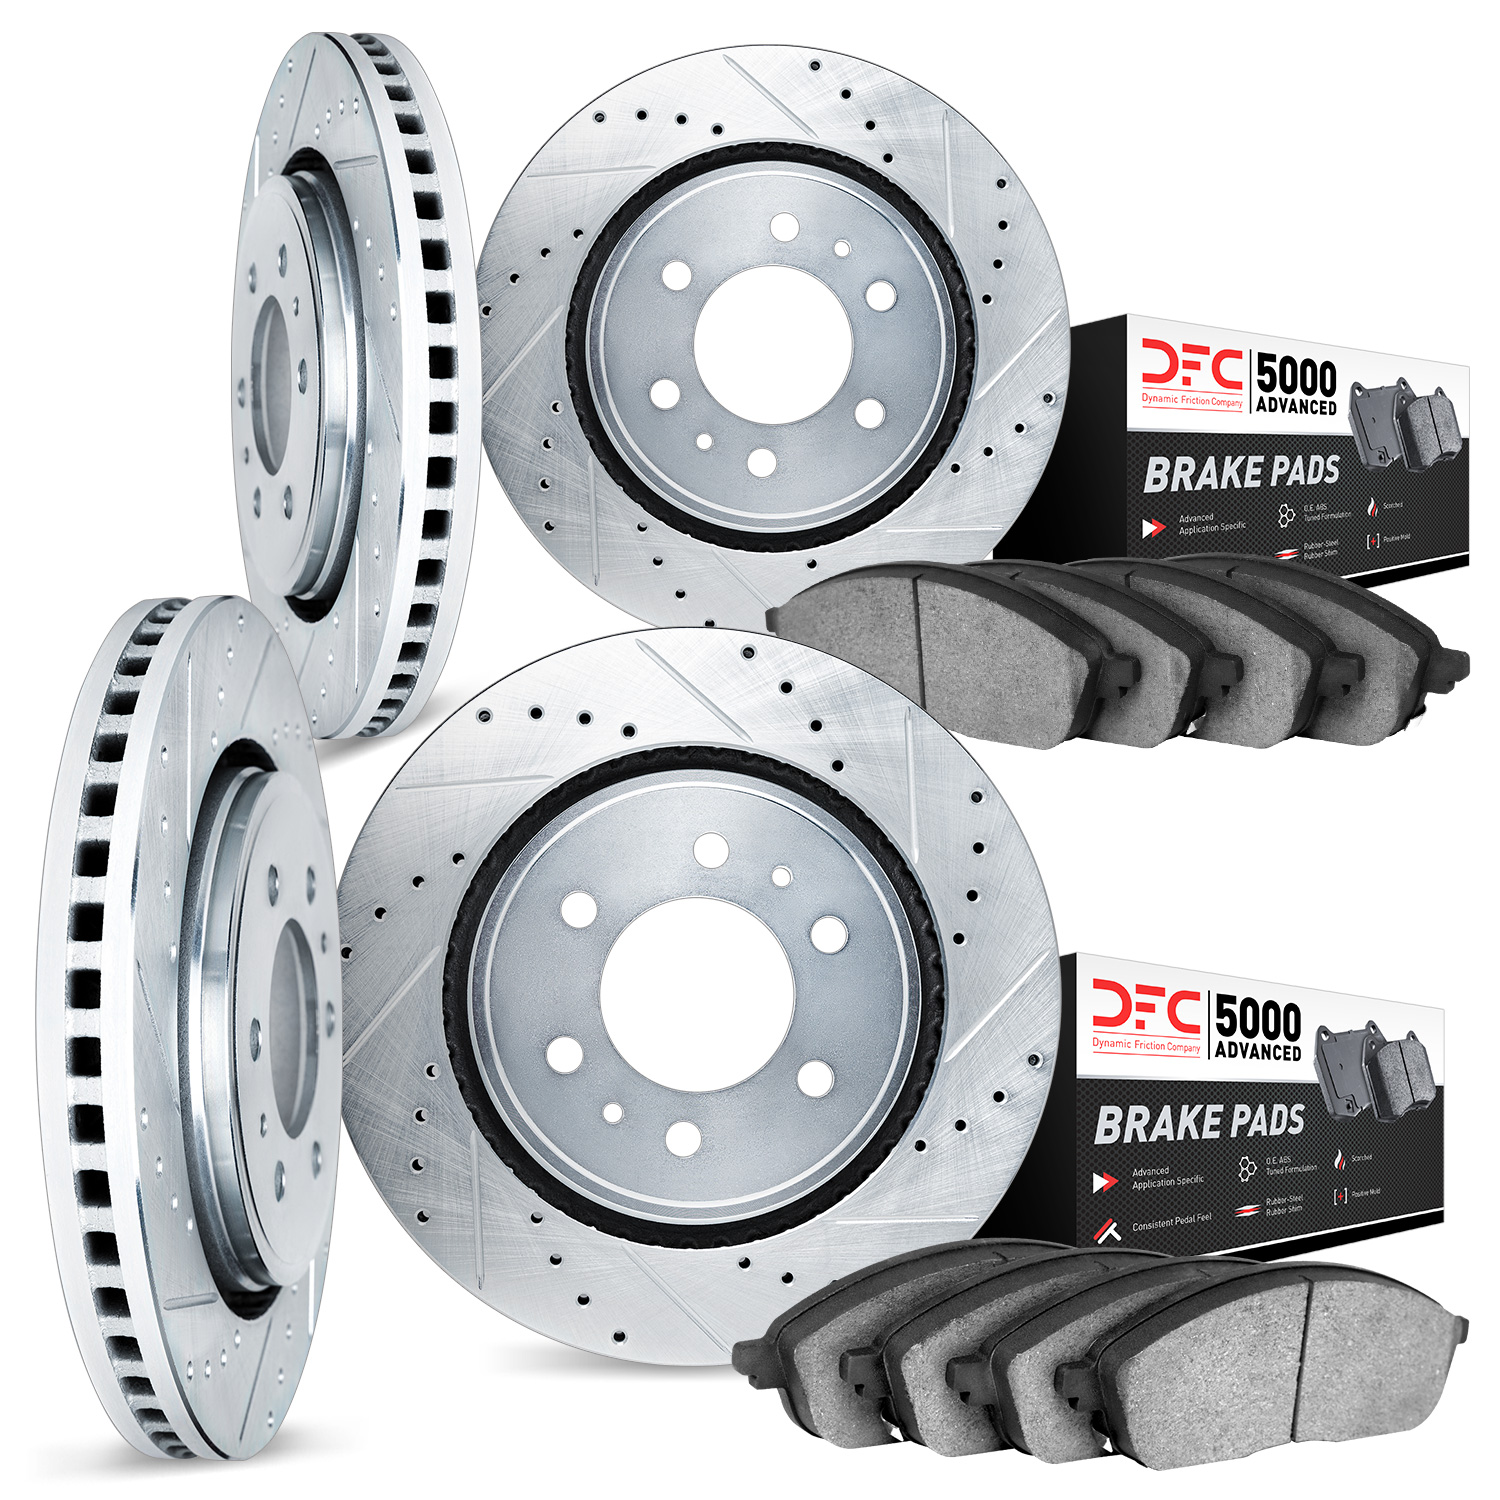 7504-46044 Drilled/Slotted Brake Rotors w/5000 Advanced Brake Pads Kit [Silver], 2004-2009 GM, Position: Front and Rear